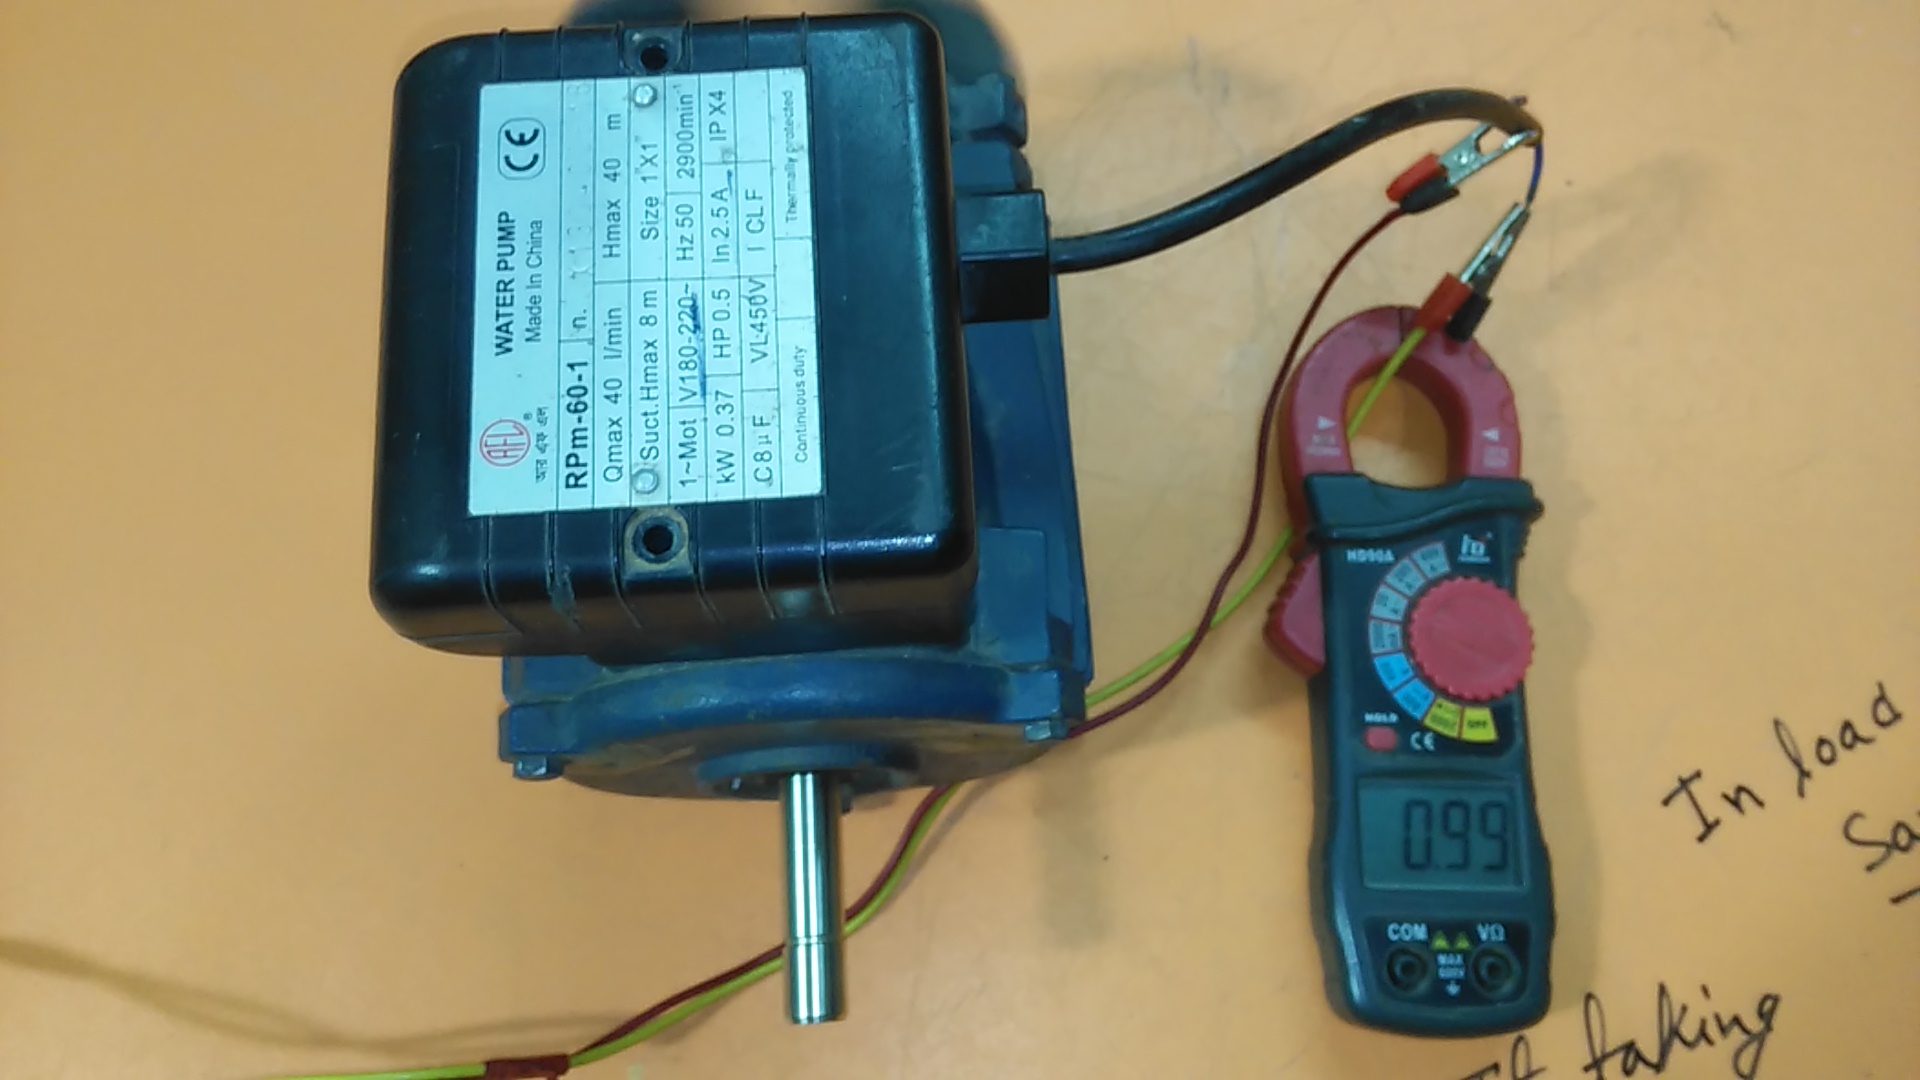 How to use a multimeter